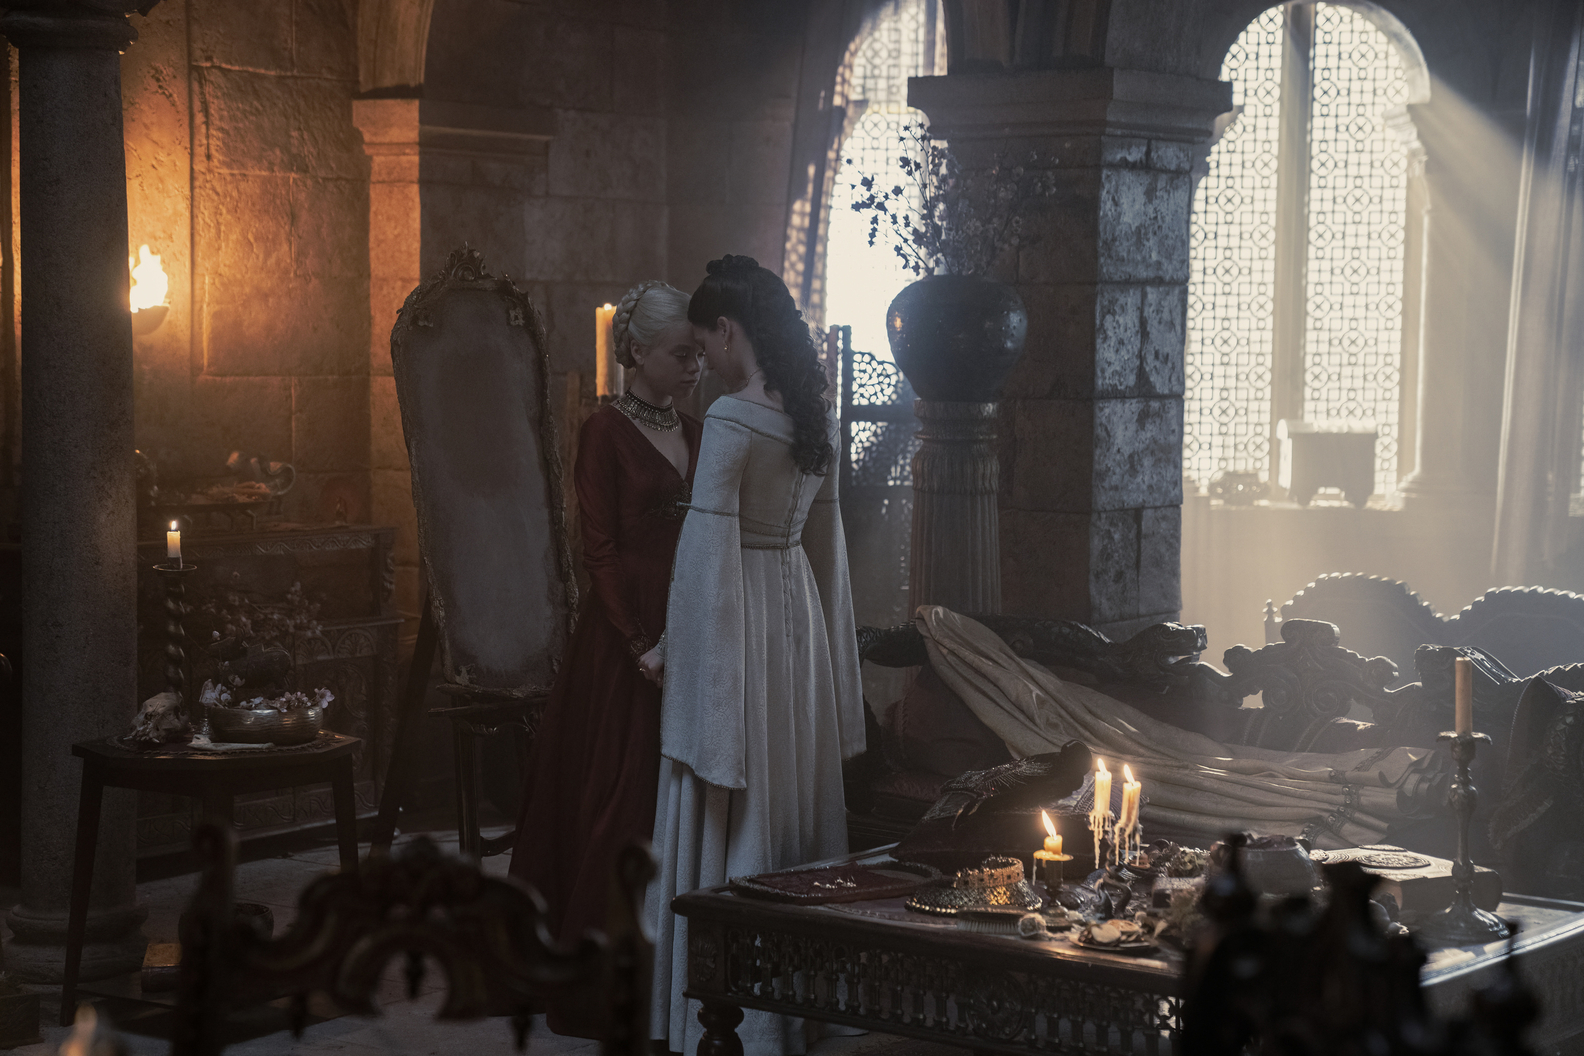 New House Of The Dragon Stills Released, Highlighting Young Rhaenyra And Alicent's Relationship. Watchers On The Wall. A Game Of Thrones House Of The Dragon Community For Breaking News, Casting, And